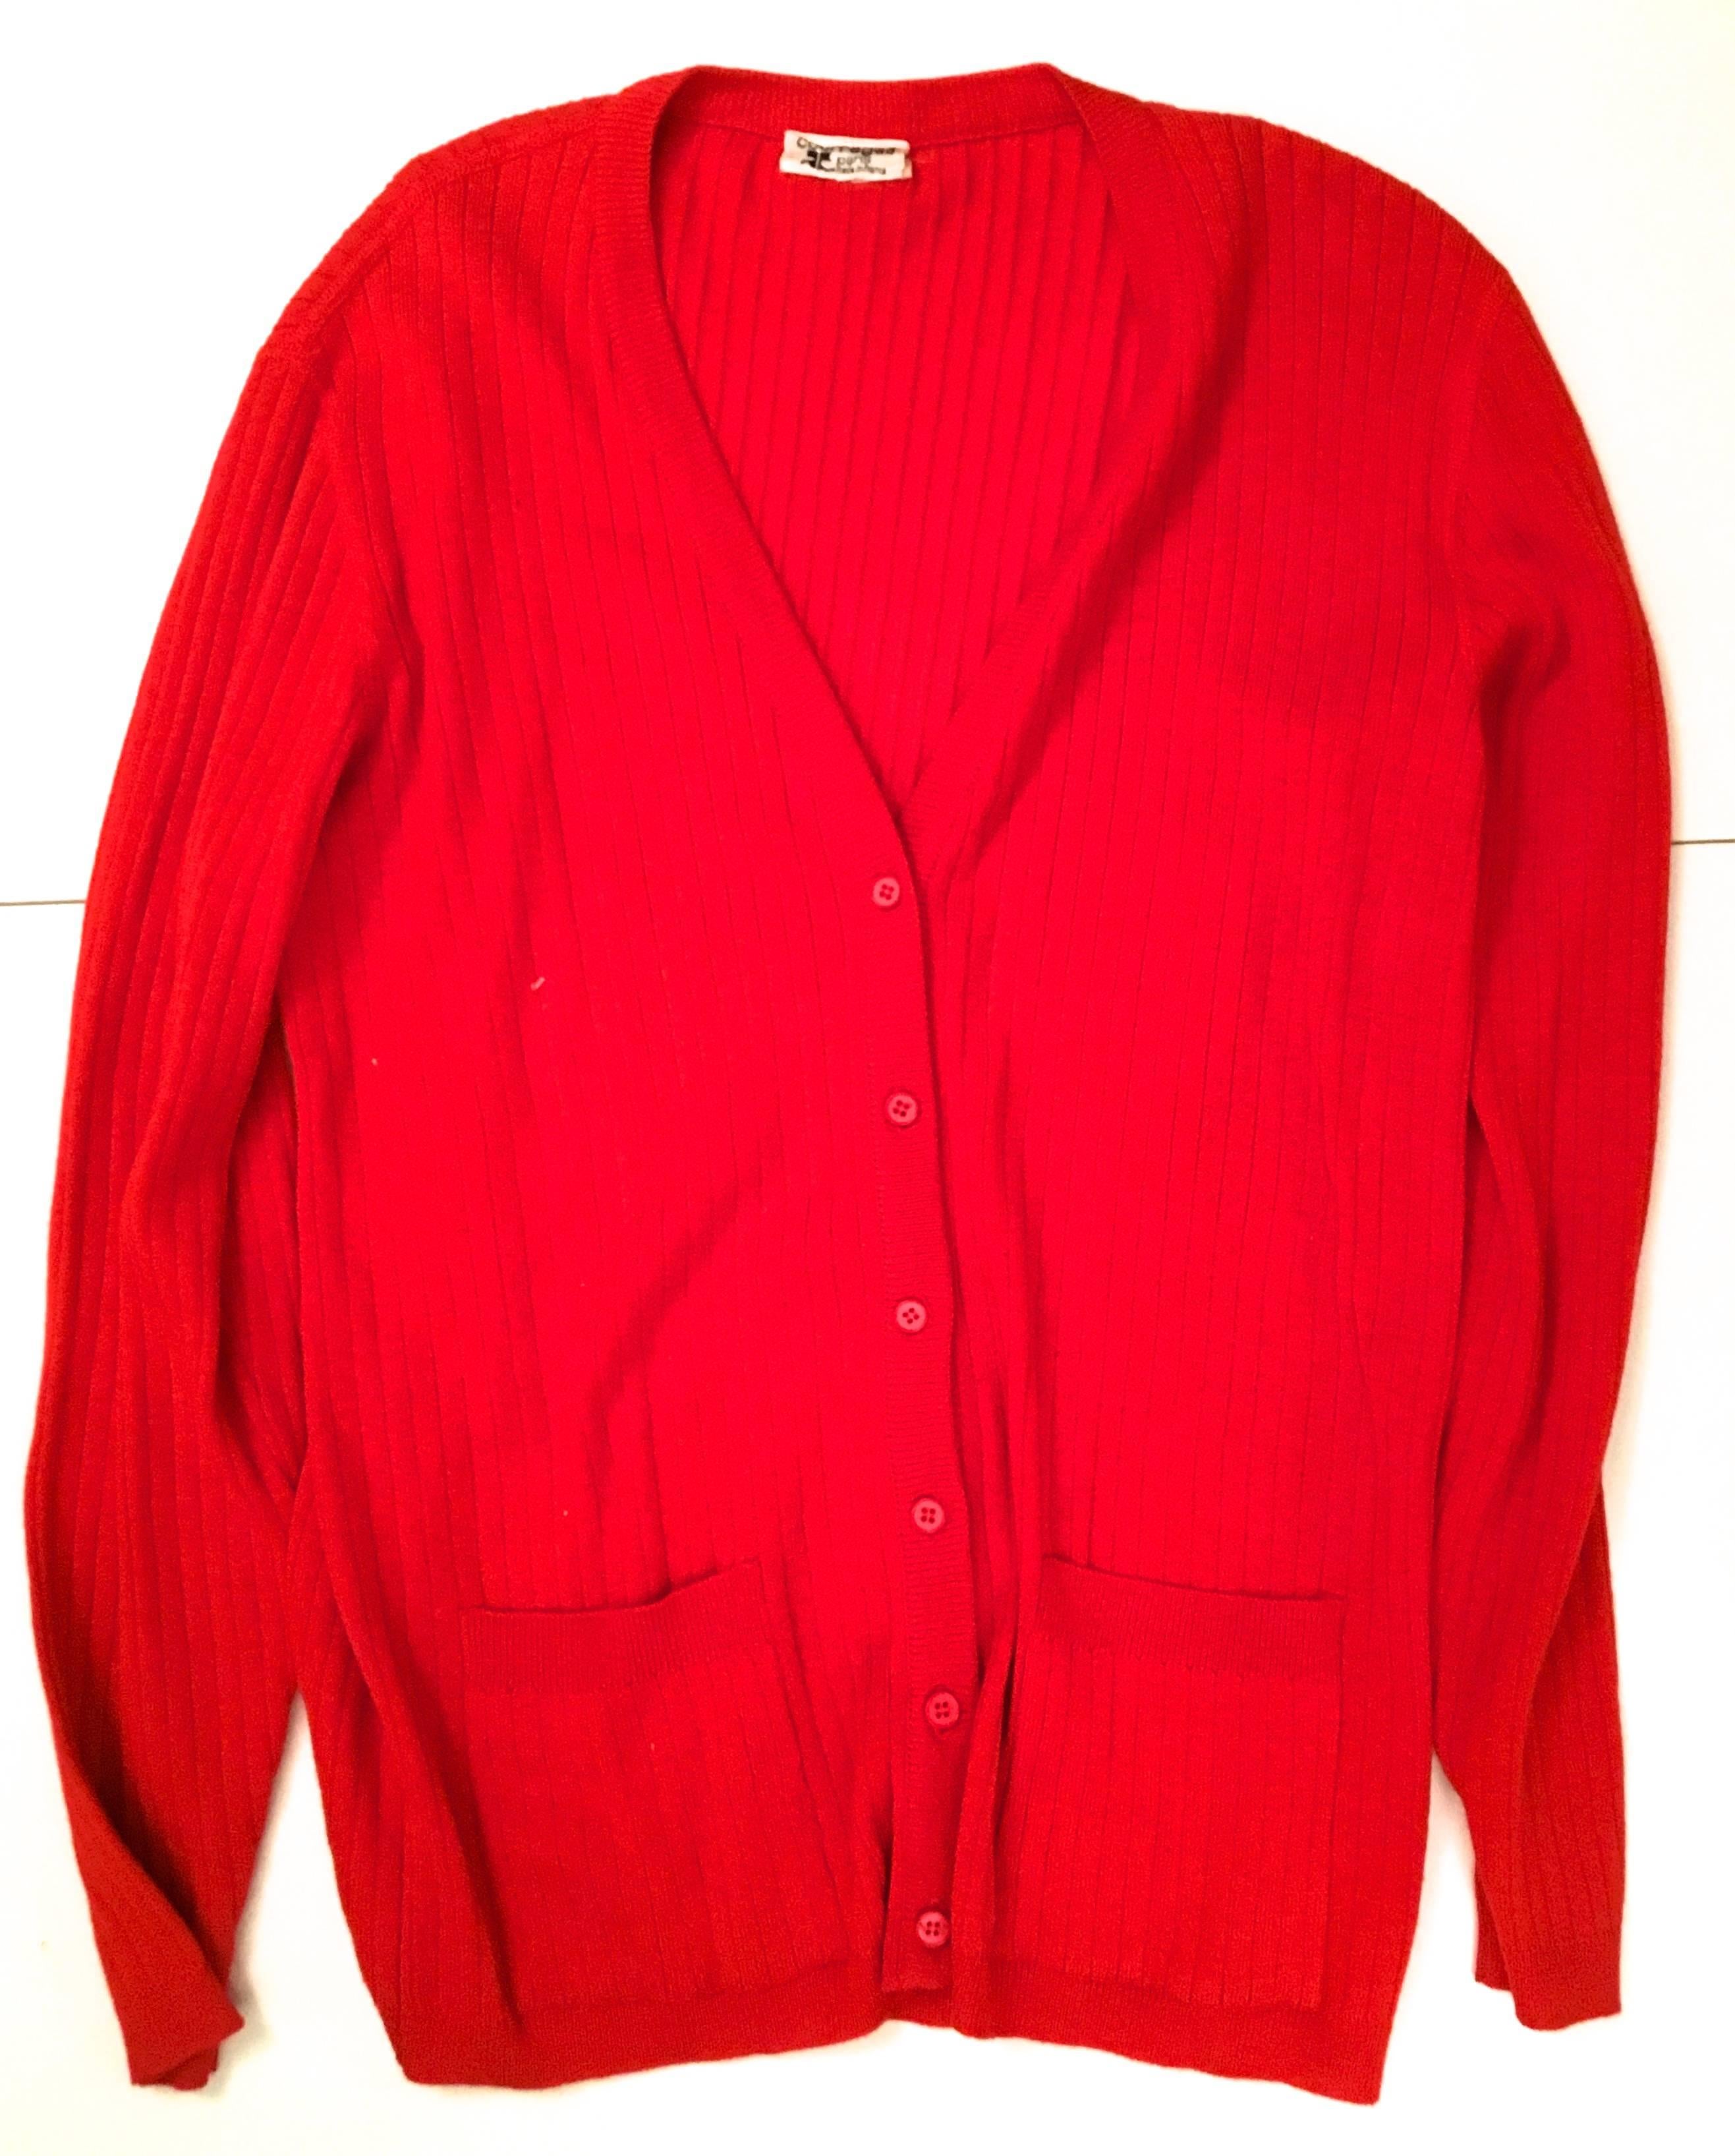 Rare Courreges Red Cardigan Sweater Set - 1970's For Sale 1